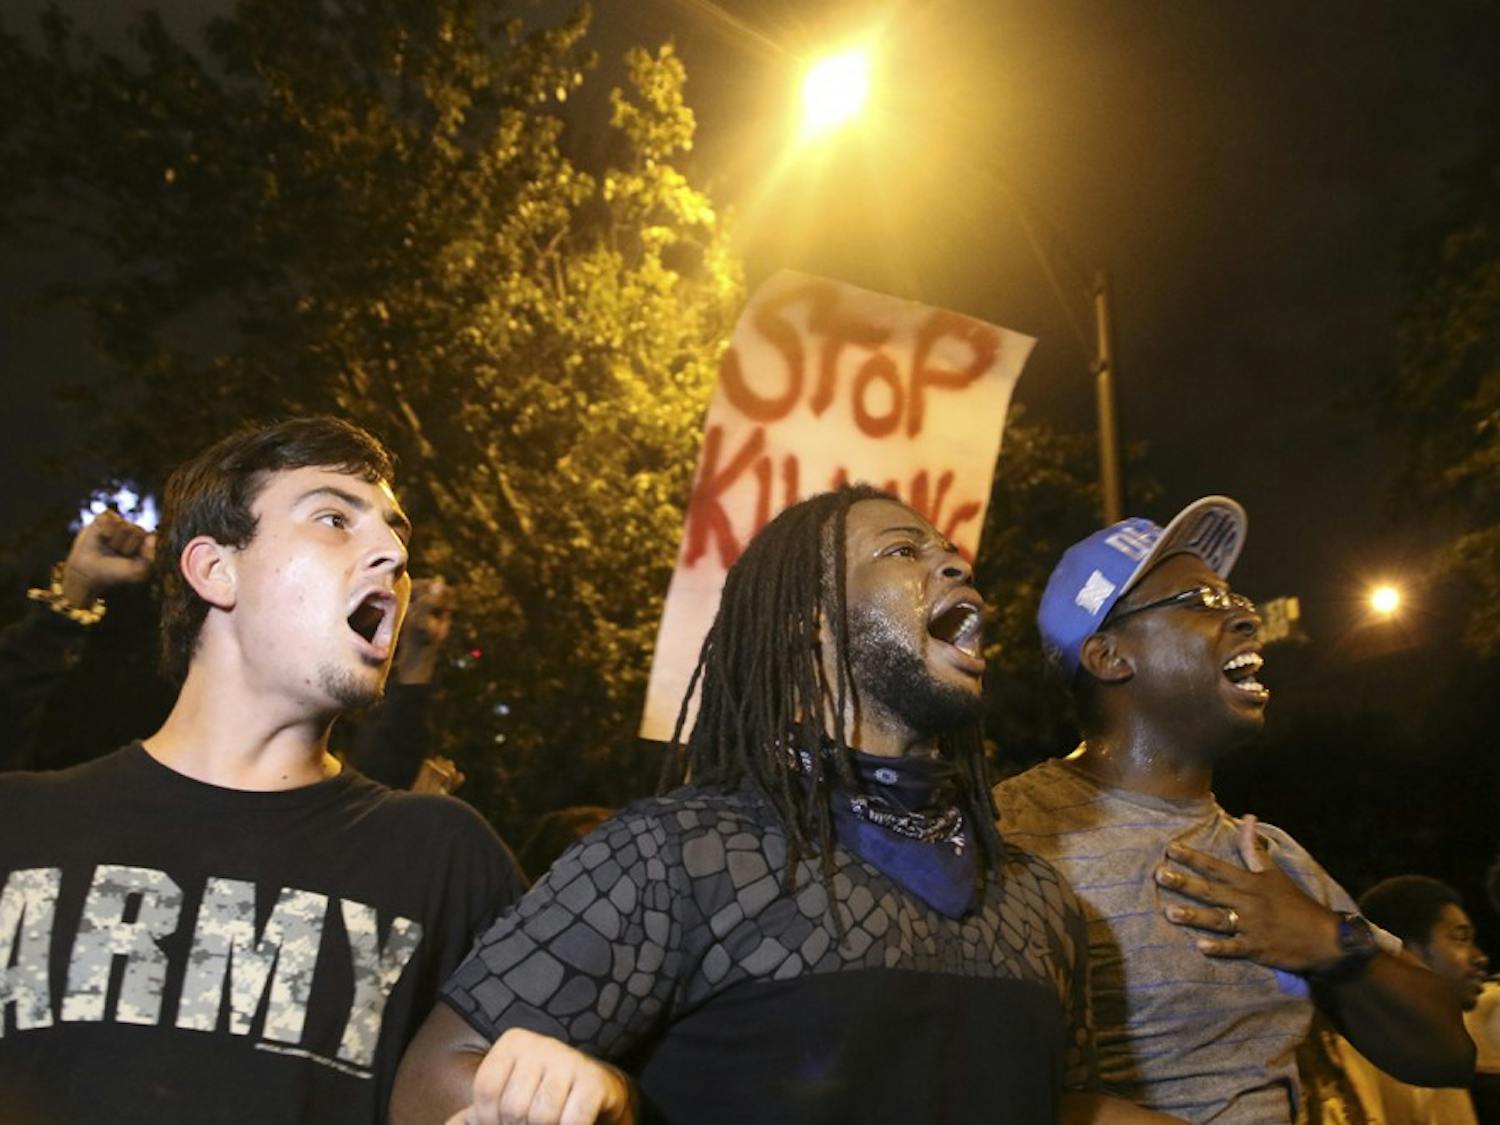 Protestors march through the streets of Charlotte on September&nbsp;22nd in response to the police shooting of Keith Scott.